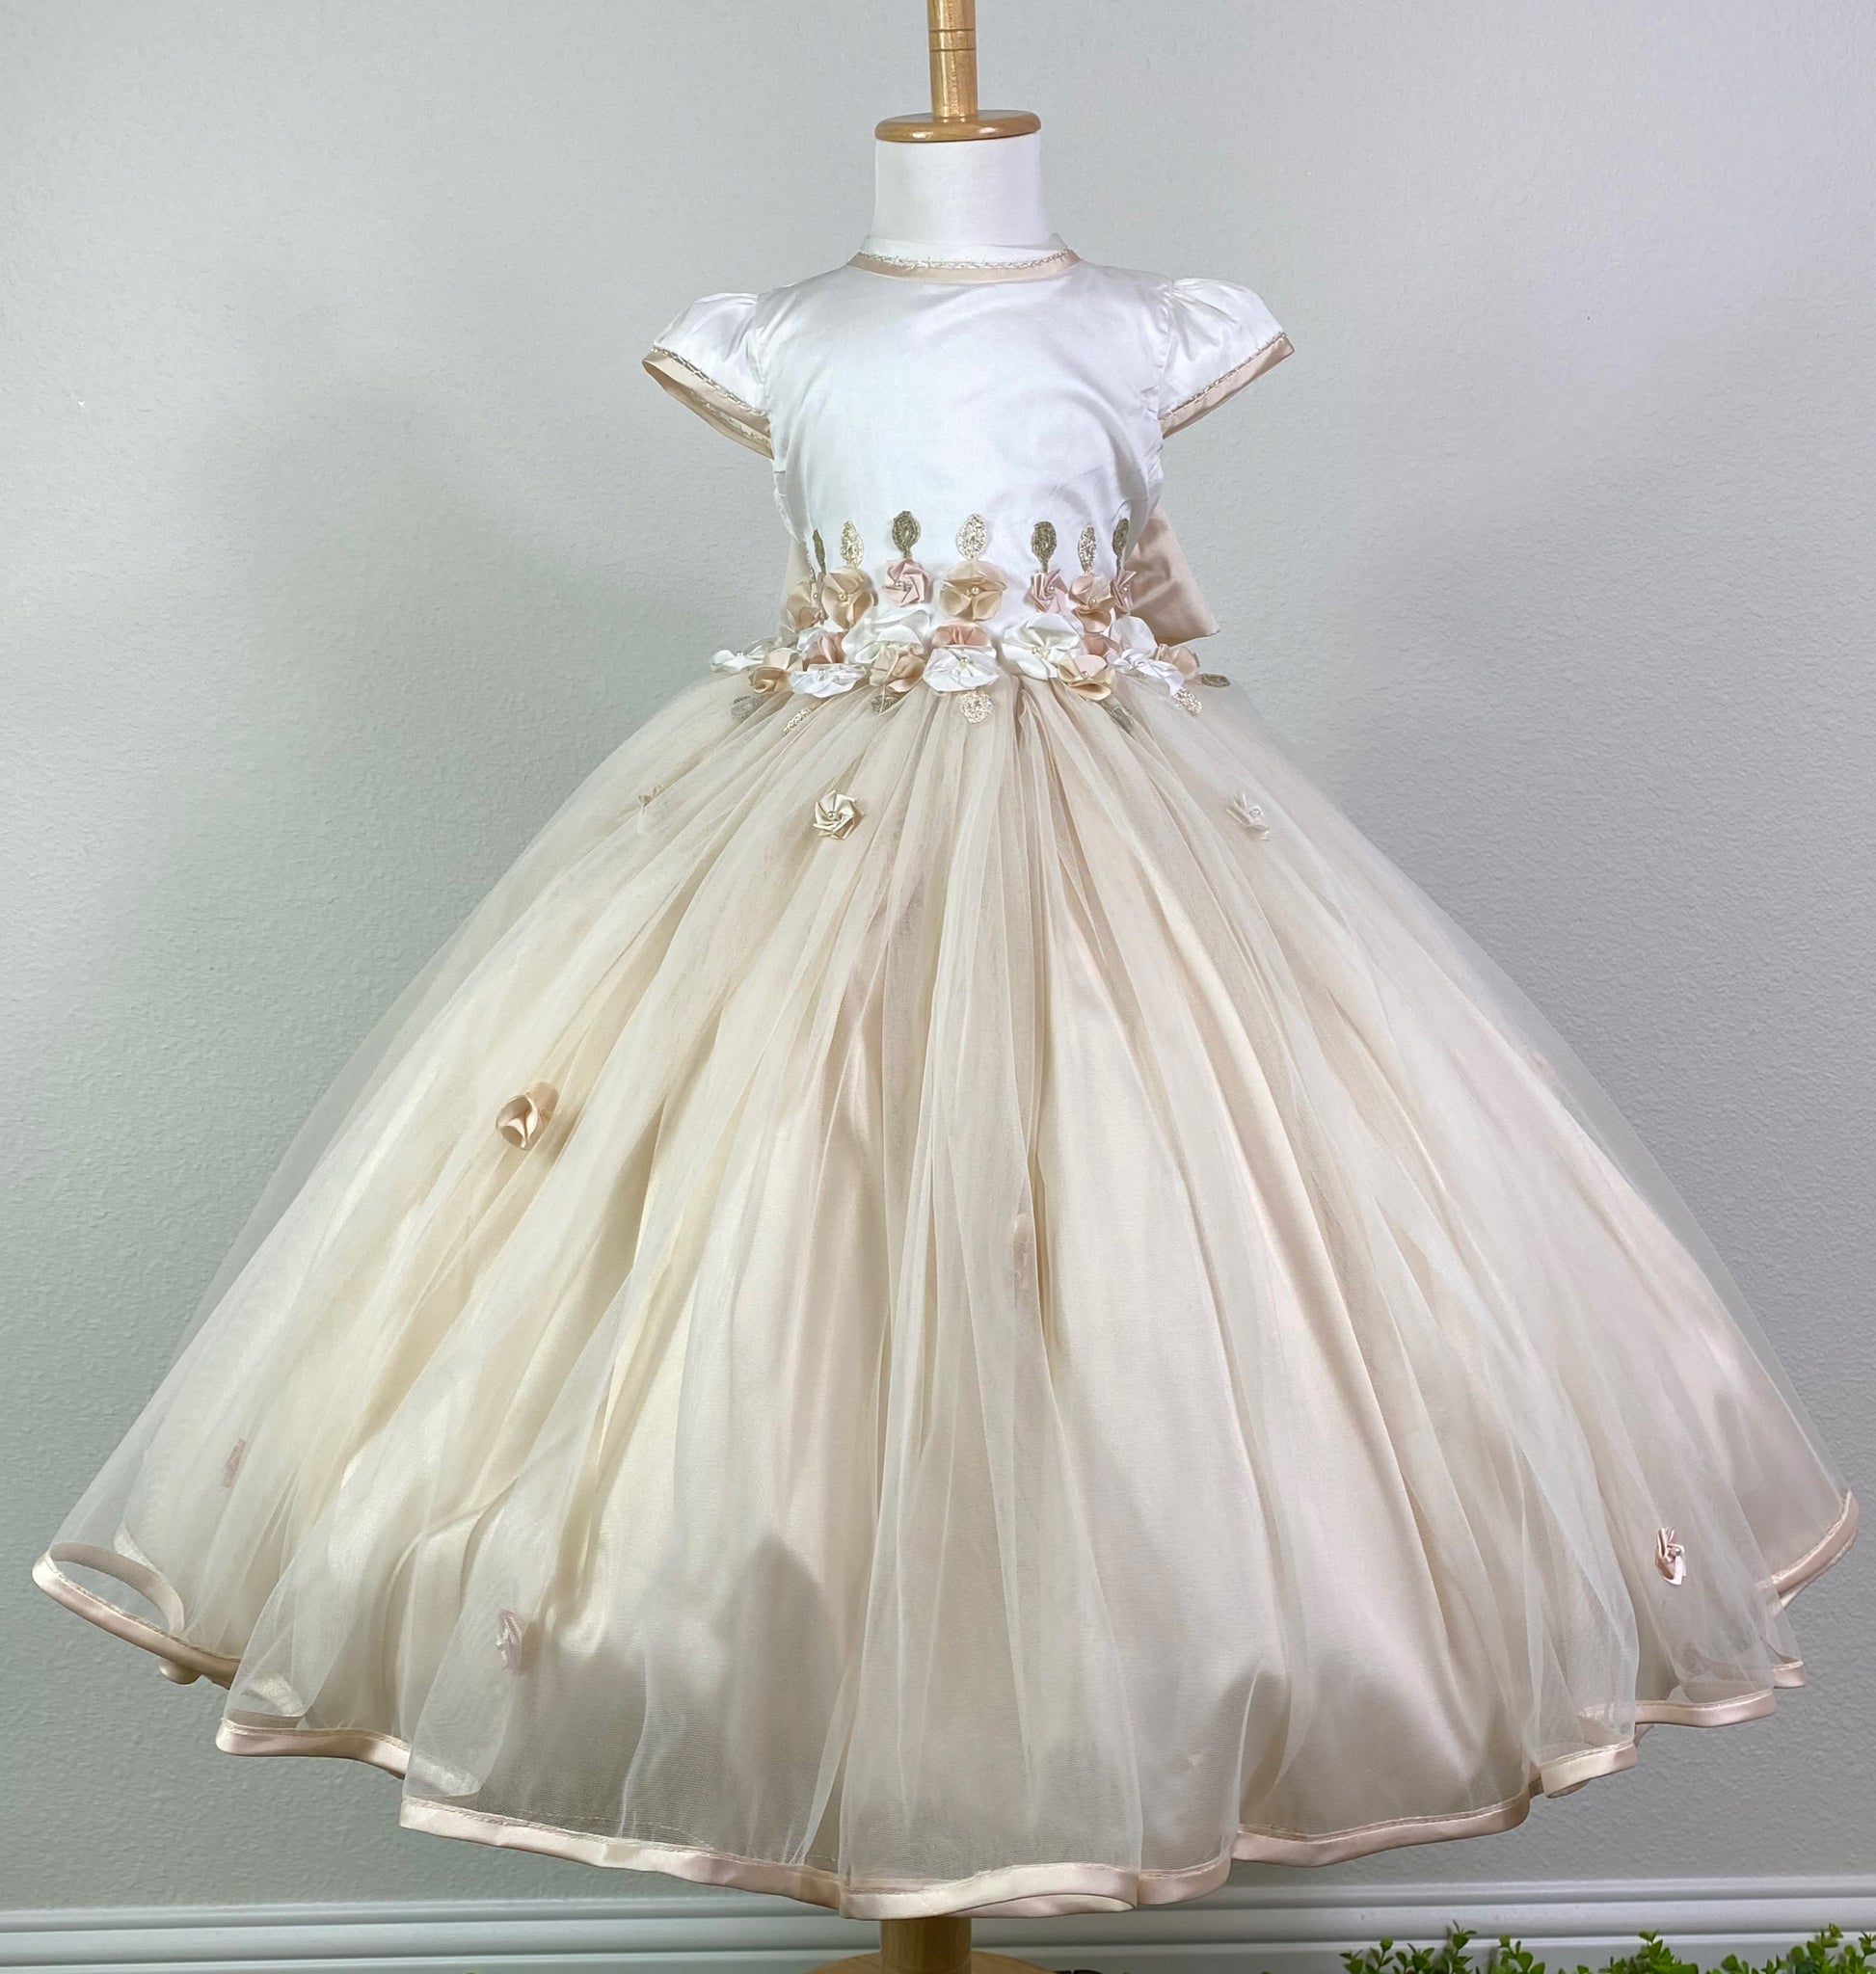 Ivory bodice with beige handstitched trim along sleeve and neckline Cap sleeves Rows of pinwheel flowers and embroidered leaves along lower bodice Beige tulle over satin skirting Small pinwheel flowers scattered along skirting Beige trim along edge of skirt Satin button closure Beige ribbon for bow Dress pictured with a petticoat Petticoat not included  Choose from a tulle, cloth, or wire for best look